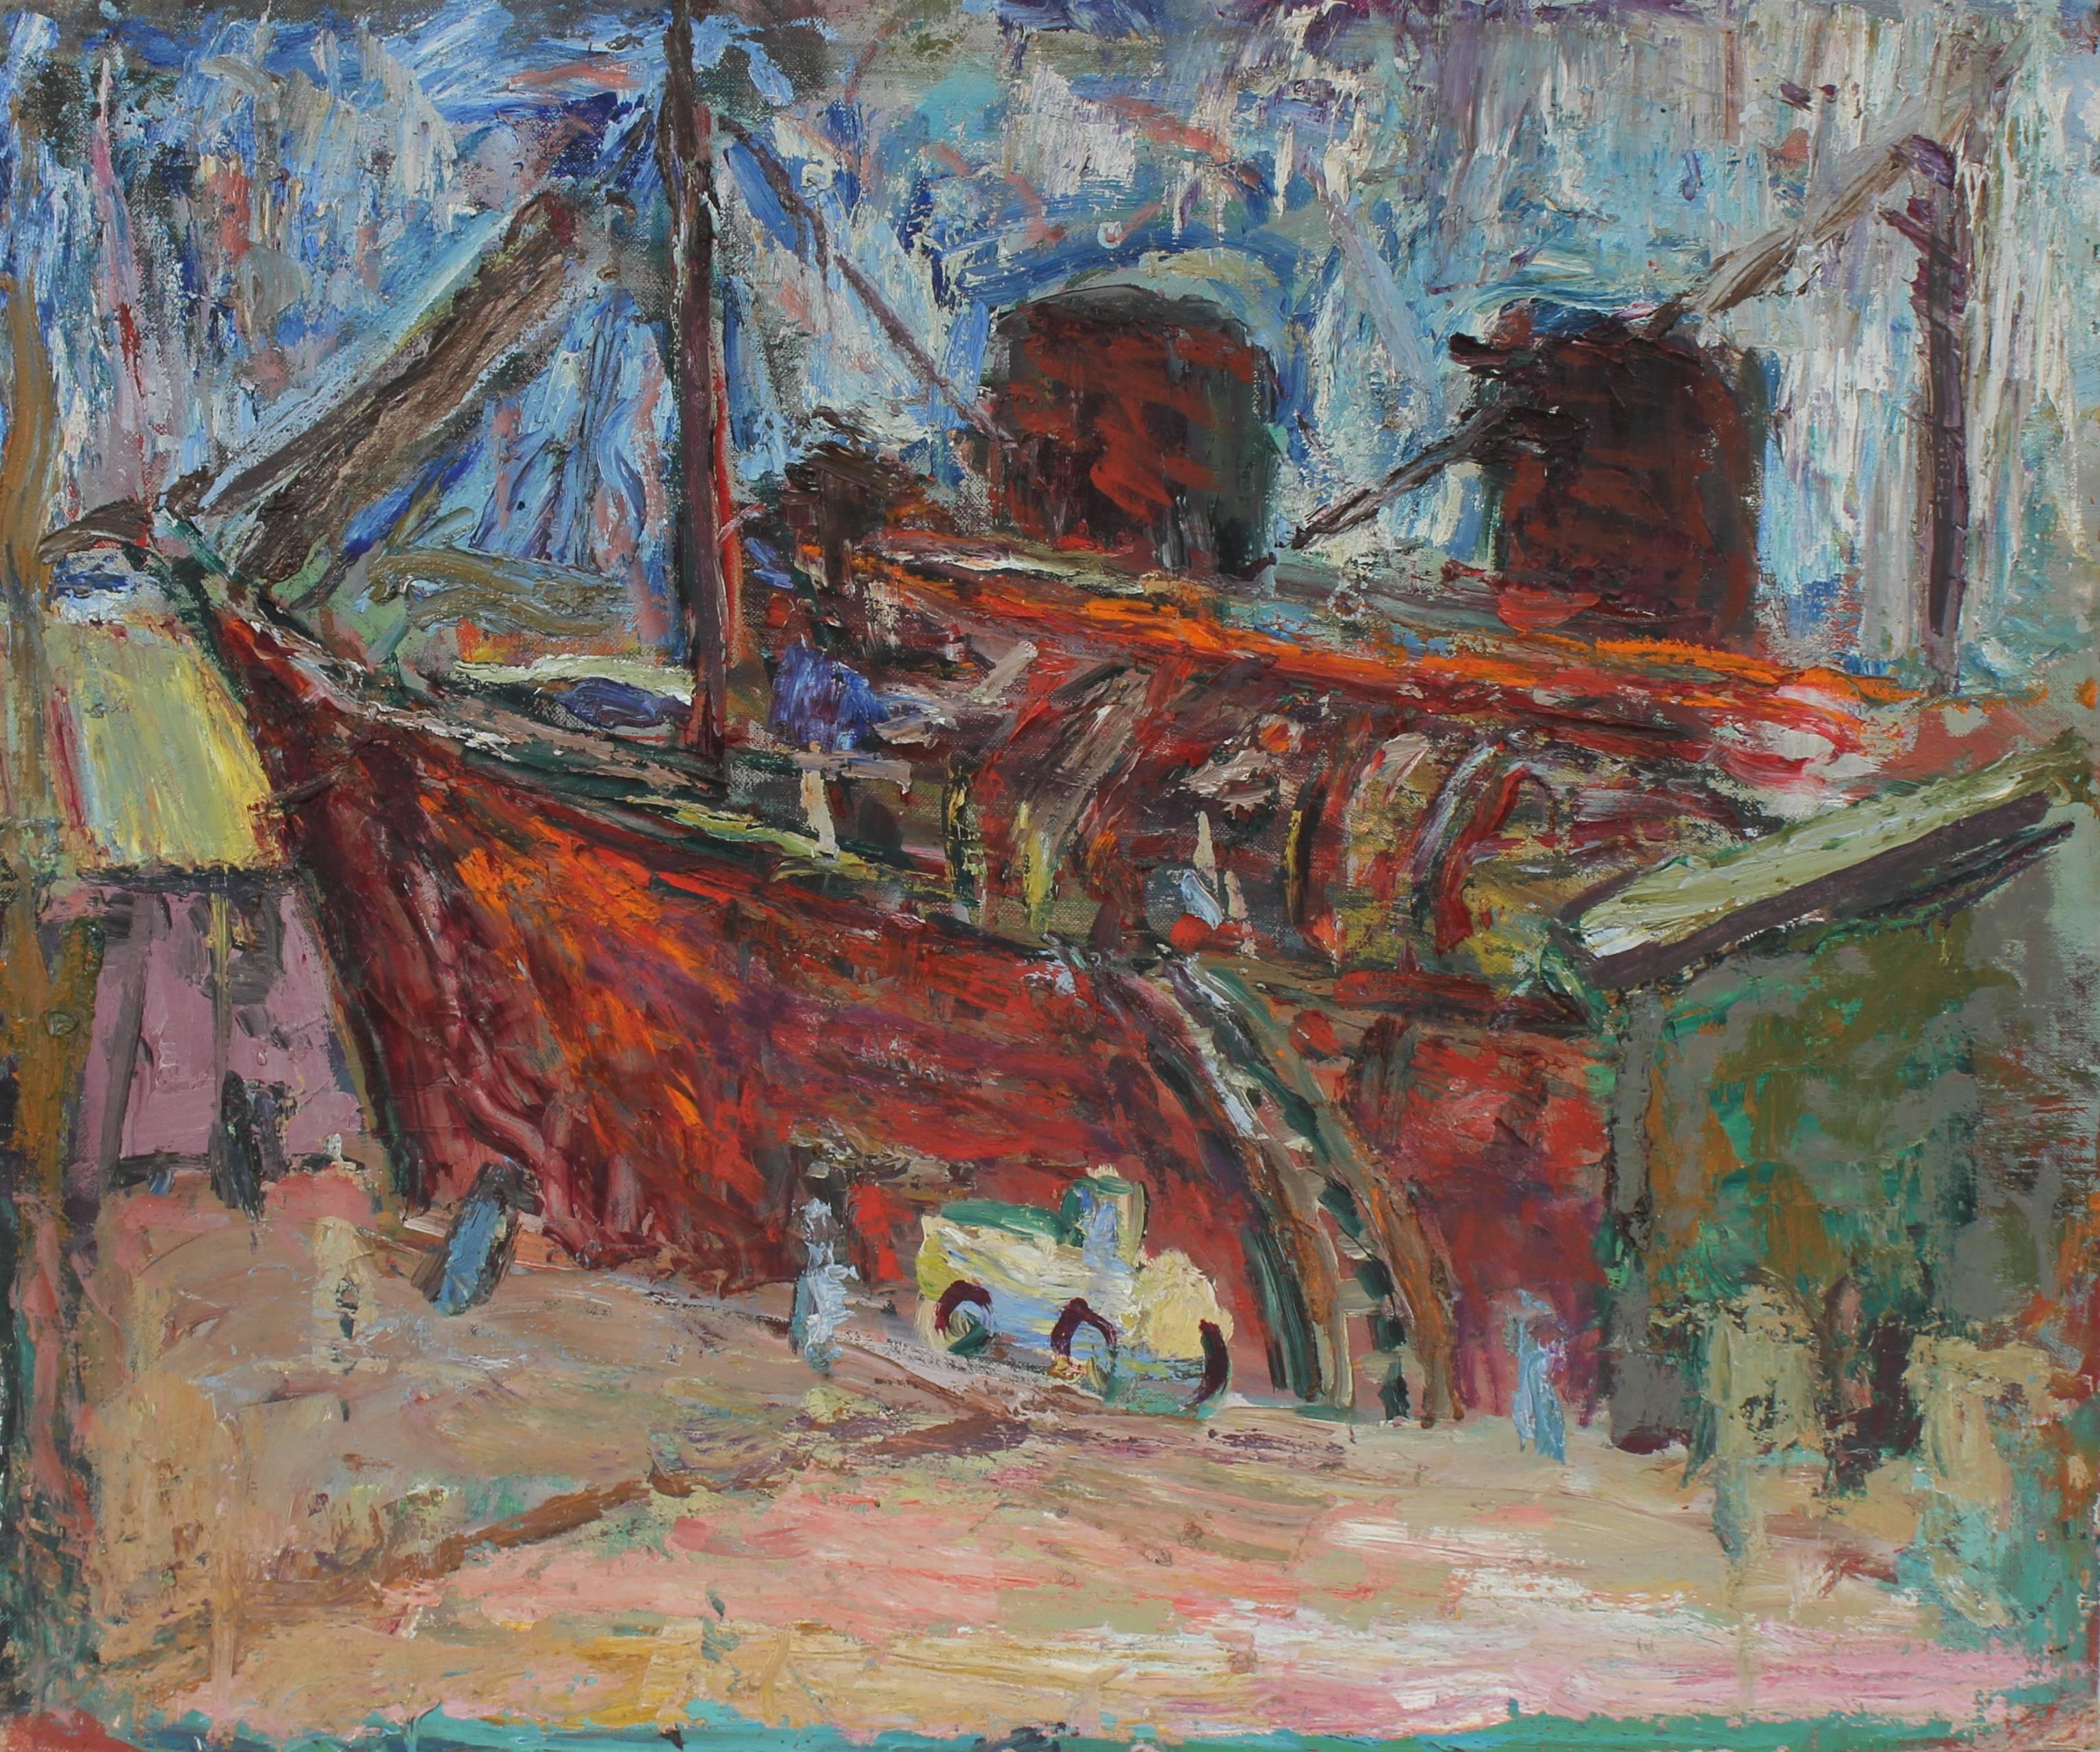 Richard Van Wingerden Landscape Painting - Expressionist Boat in Harbor, San Francisco Oil Painting, Mid 20th Century